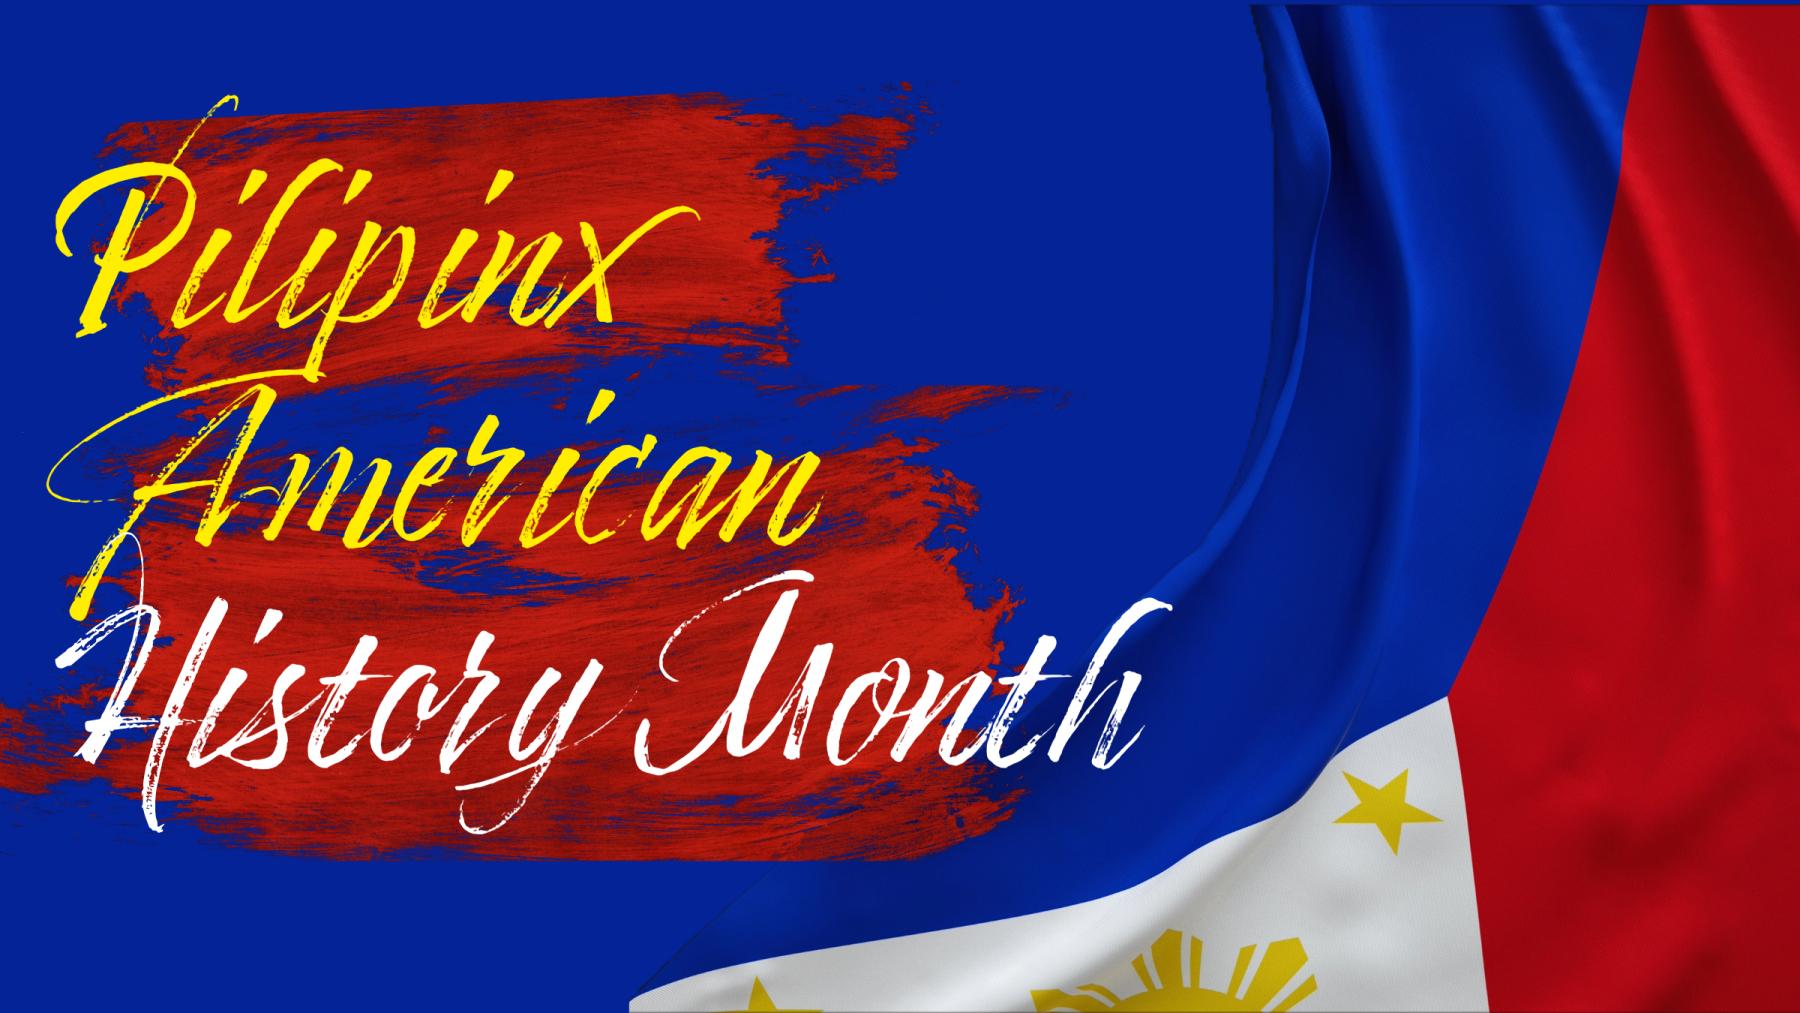 Navy blue background that has a portion of the Philippine's flag draped from the top right corner to the bottom right-middle. On top of red paint smears on the left-hand side is "Pilipin@ American History Month" in a cursive handwriting font. "Pilipinx American" is in gold while "History Month" is in white.